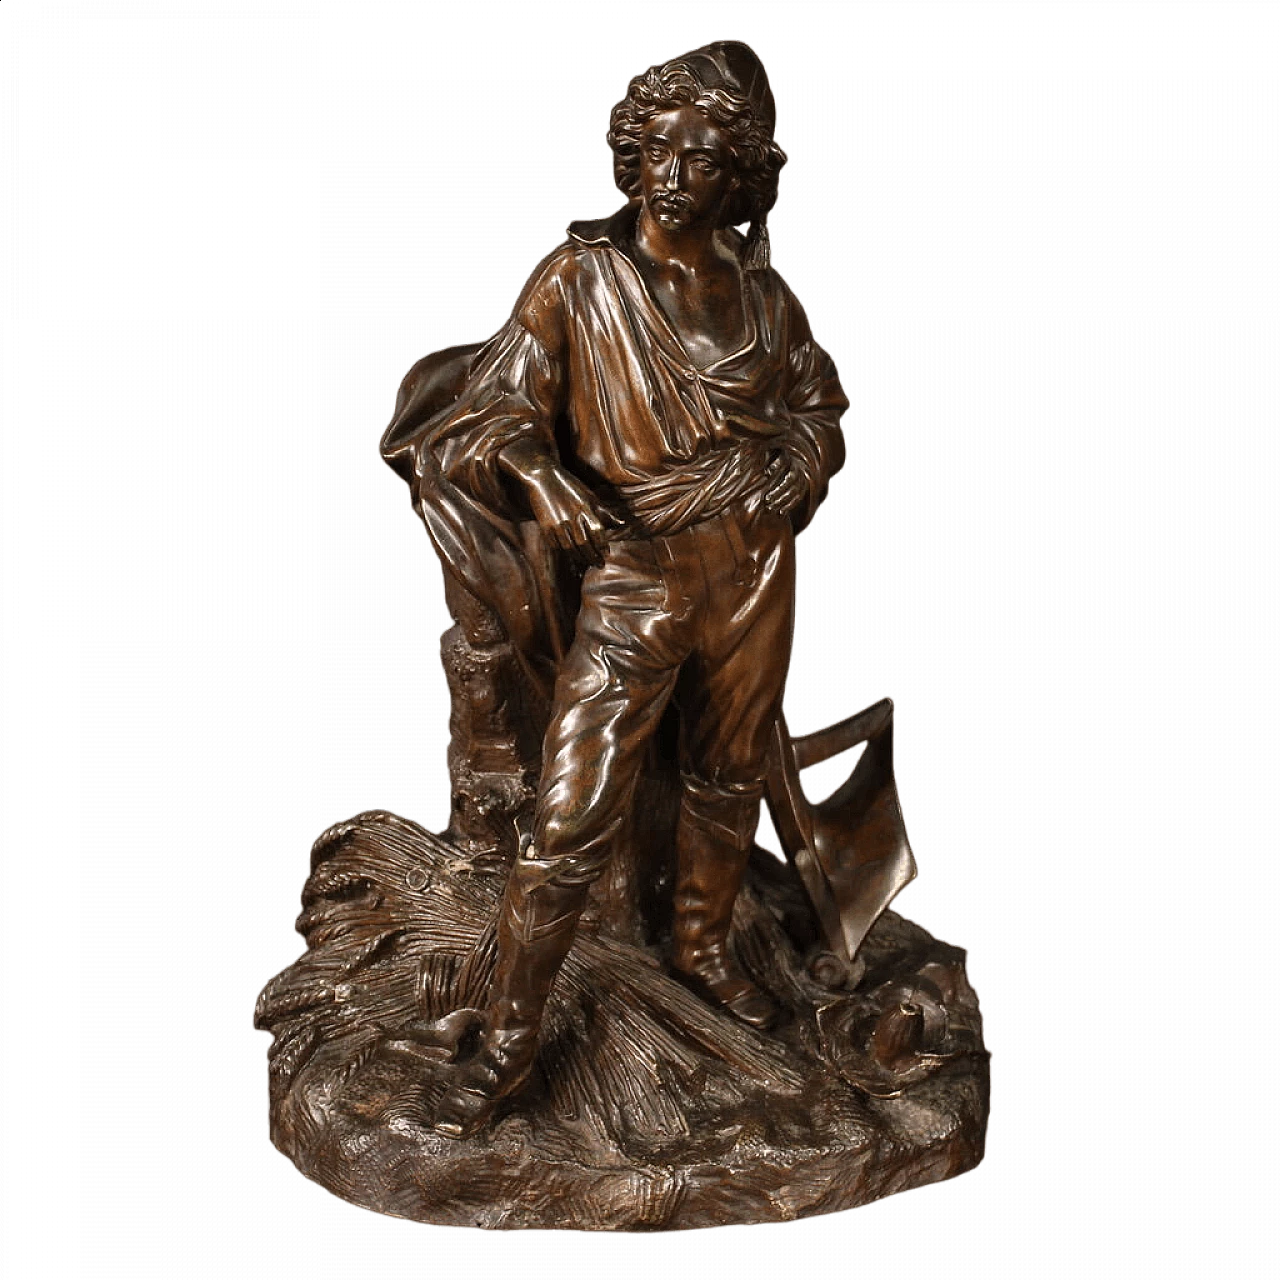 Chiselled and patinated bronze sculpture, second half of the 19th century 14